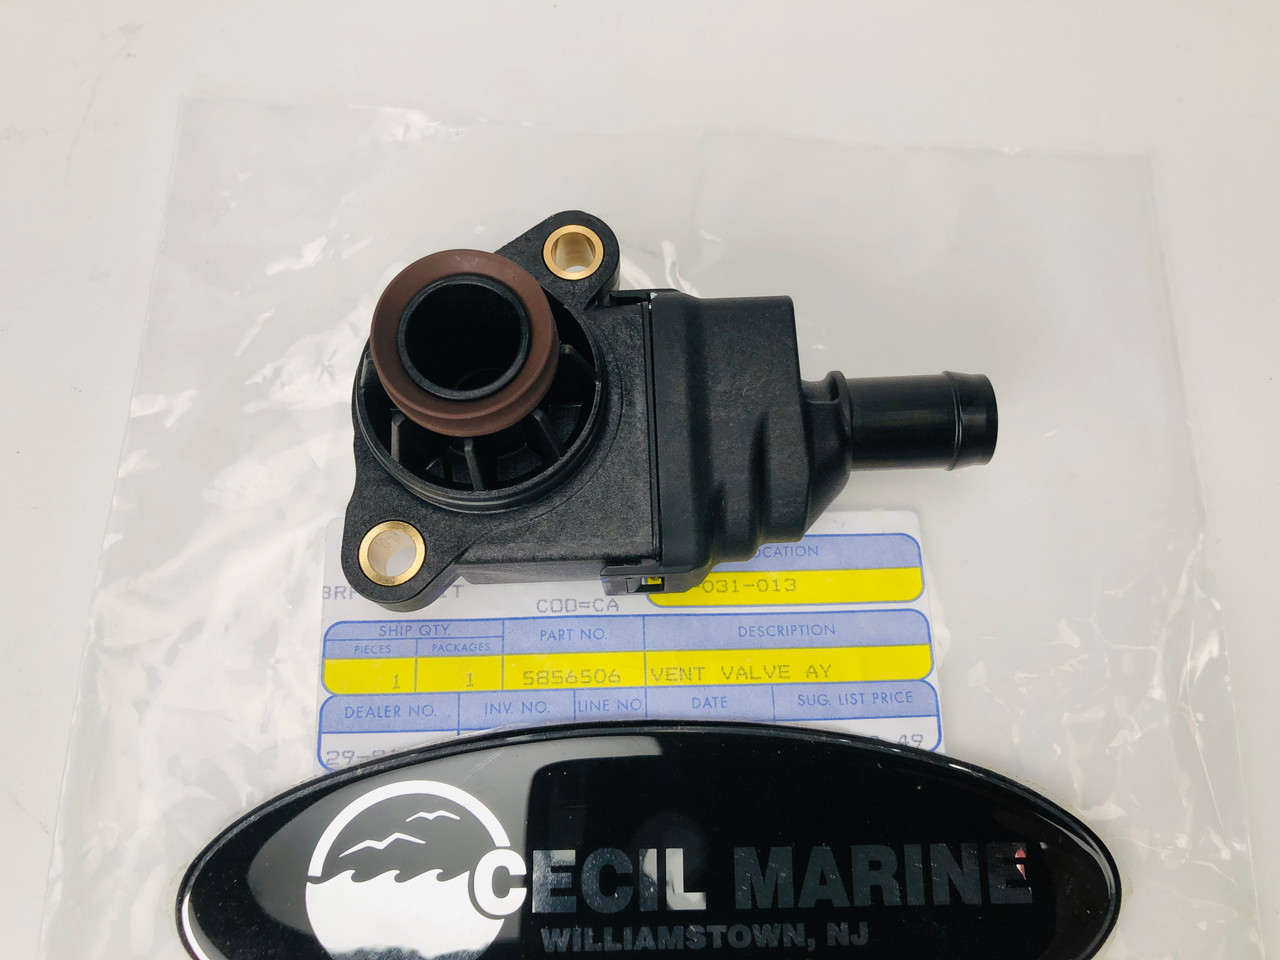 $89.99* GENUINE BRP no tax* VENT VALVE  5856506 *In Stock & Ready To Ship